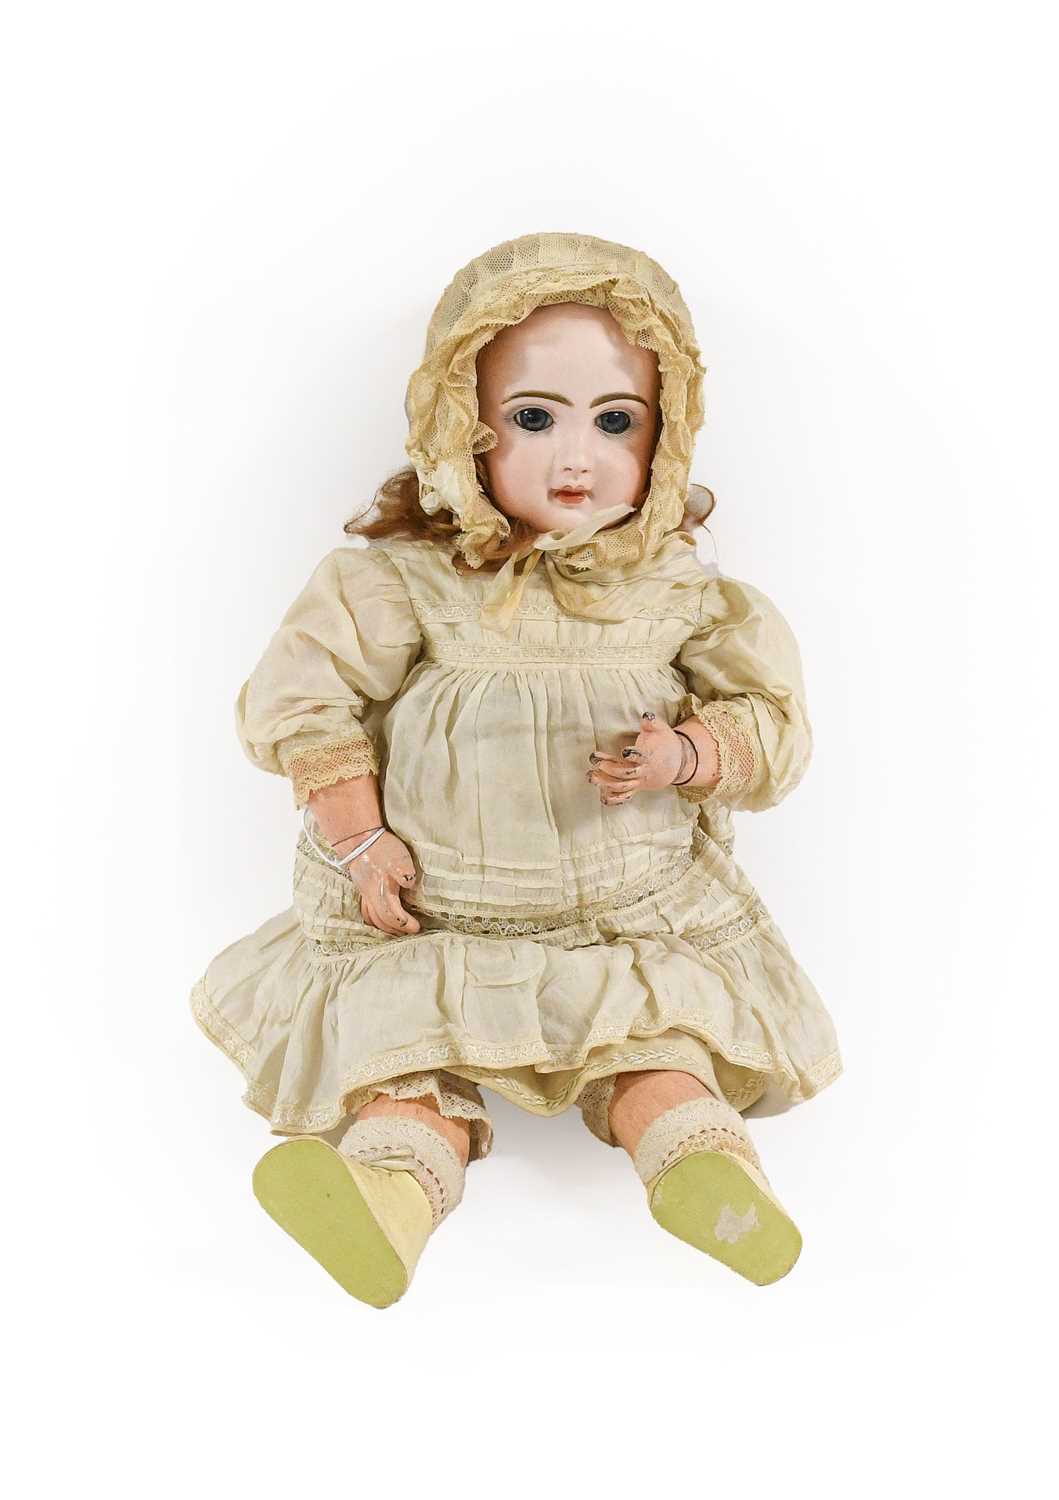 A French Tete Jumeau Bisque Socket Head Bebe Doll, with fixed blue glass paper-weight eyes, finely